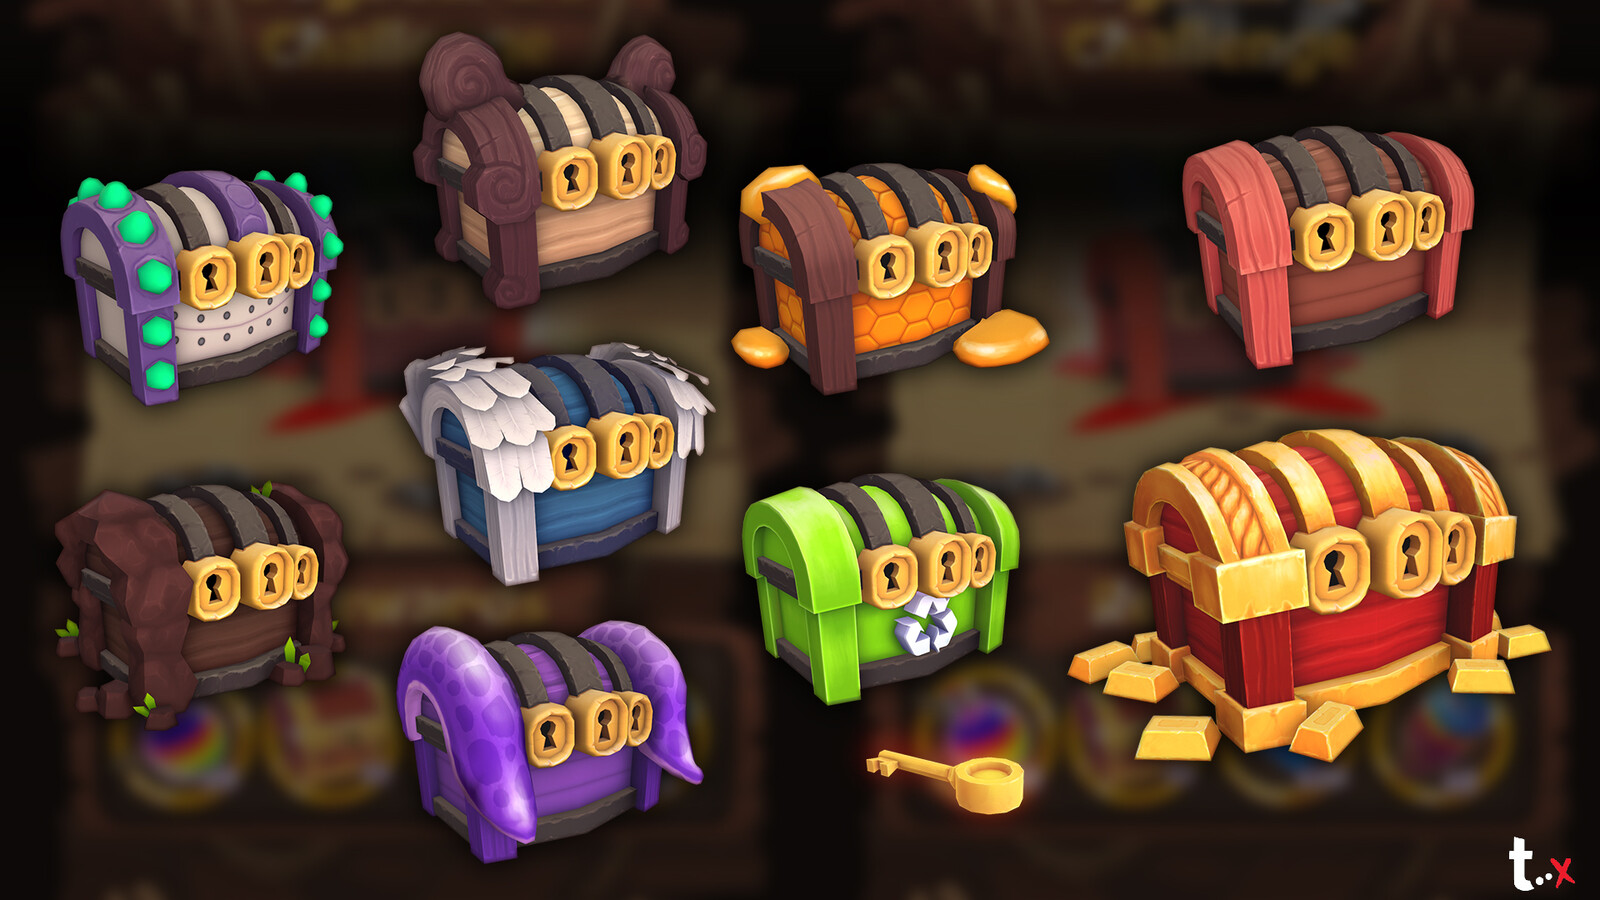 3D versions of all the chests